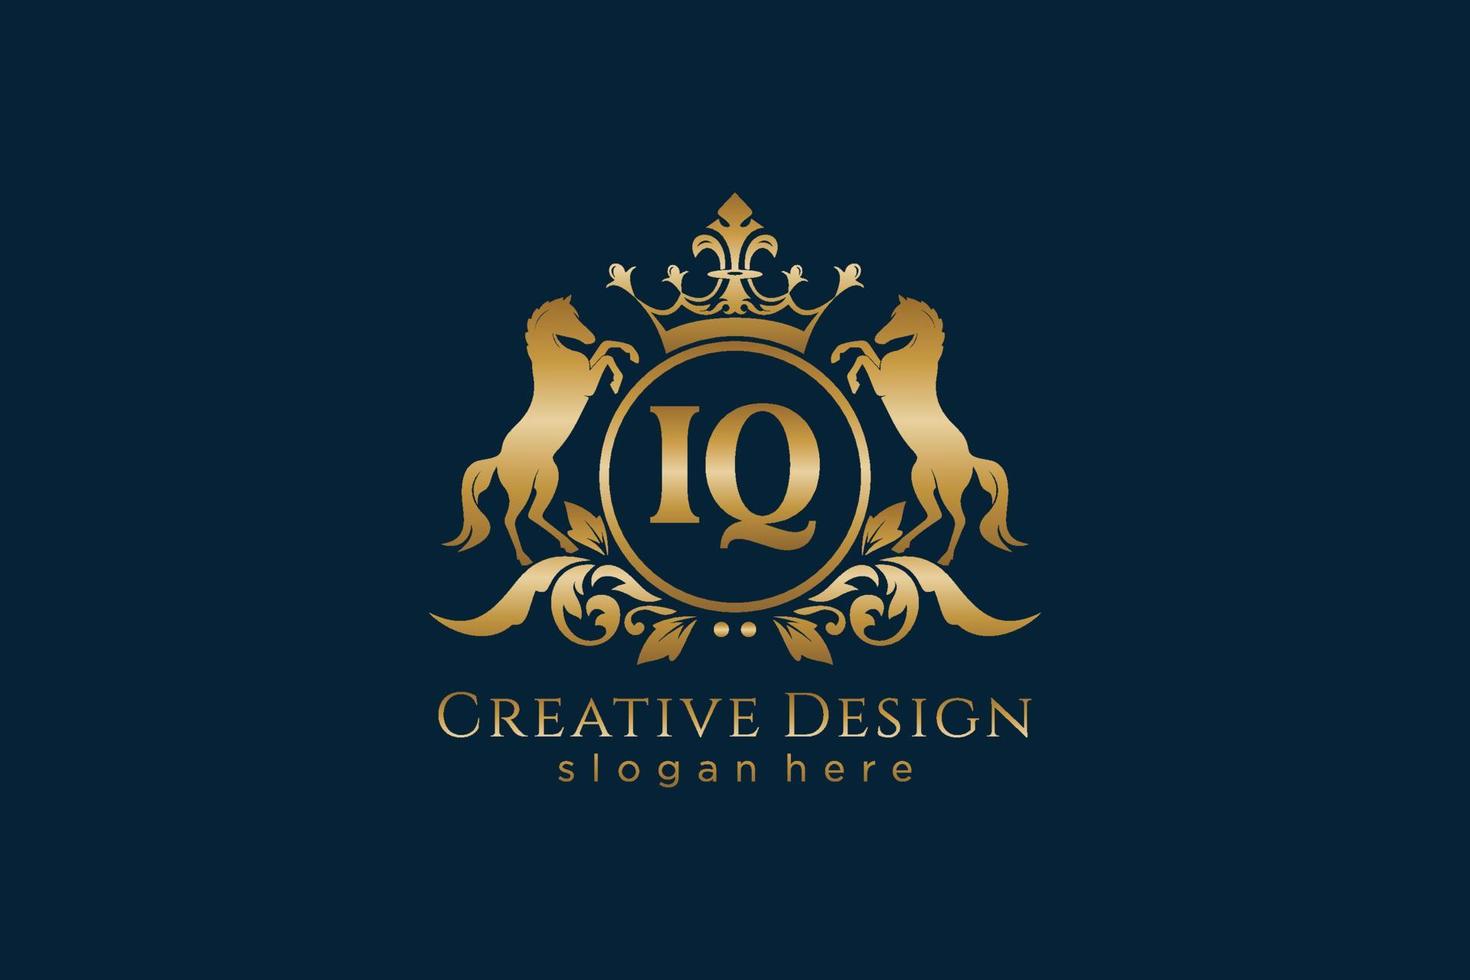 initial IQ Retro golden crest with circle and two horses, badge template with scrolls and royal crown - perfect for luxurious branding projects vector